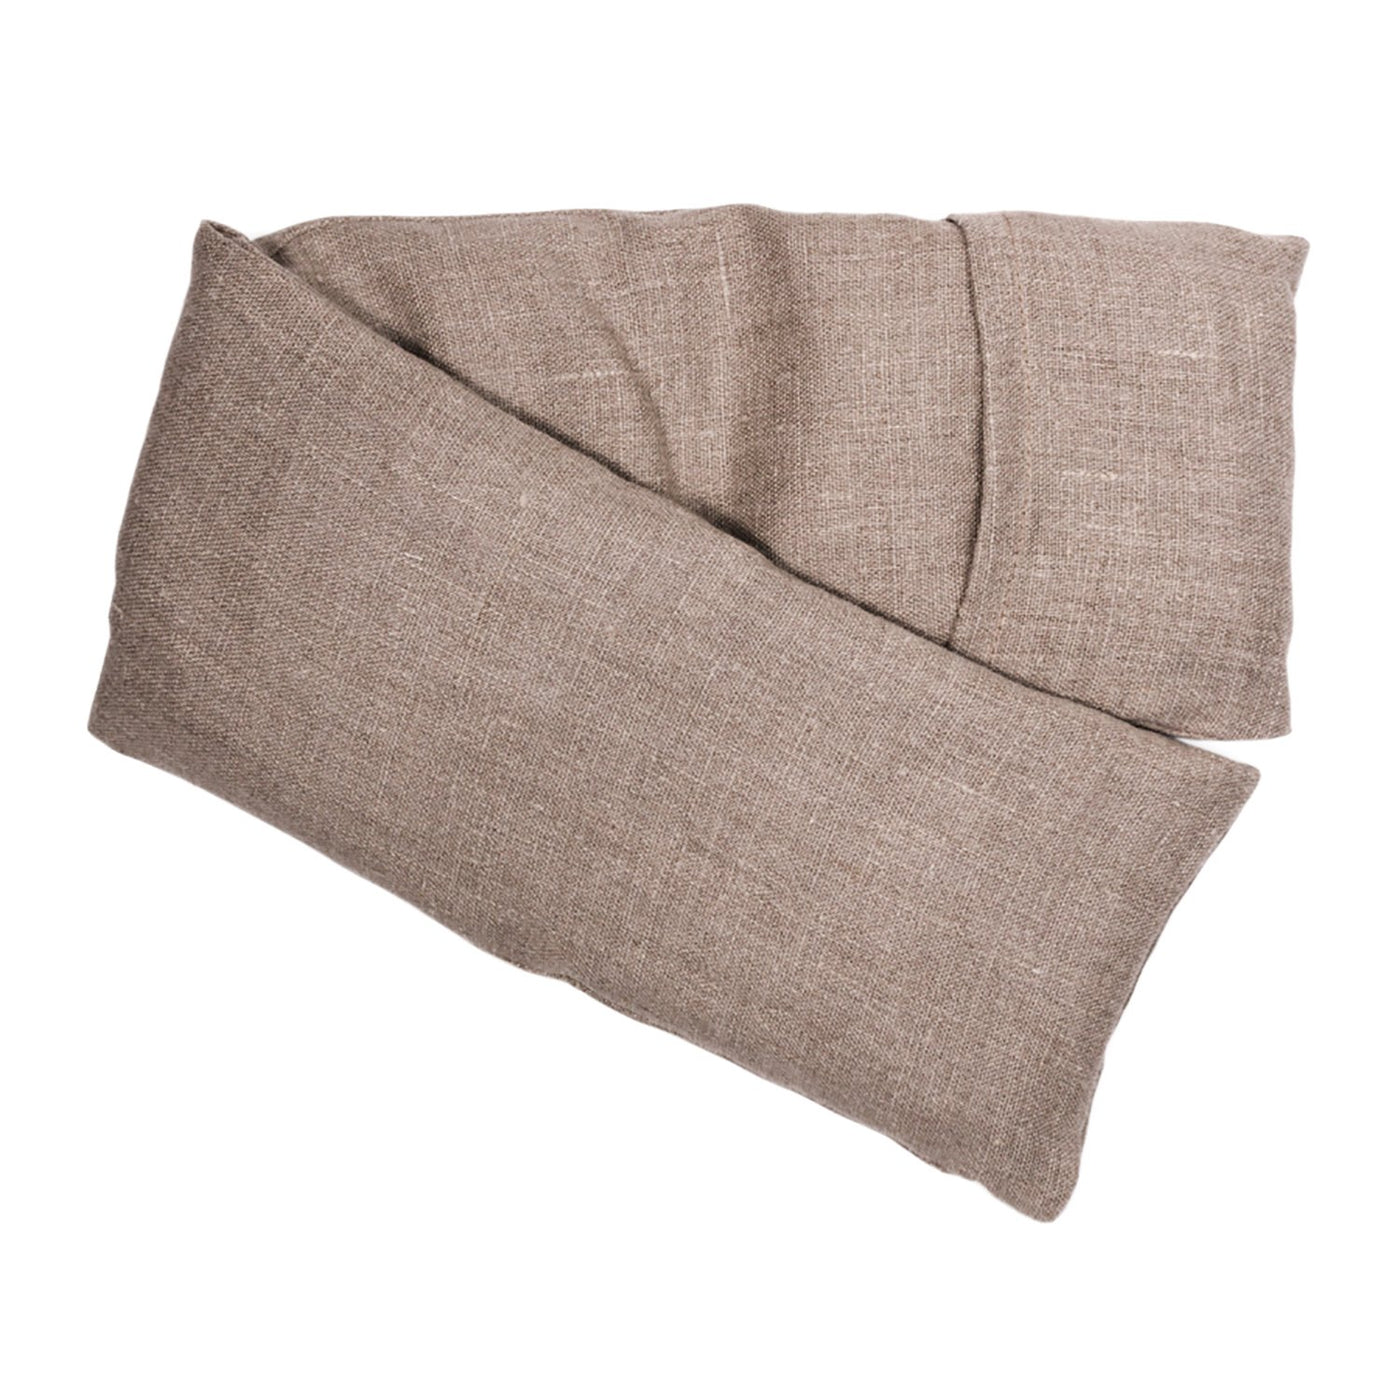 ELIZABETH W LINEN - HOT/COLD FLAXSEED PACK NATURAL